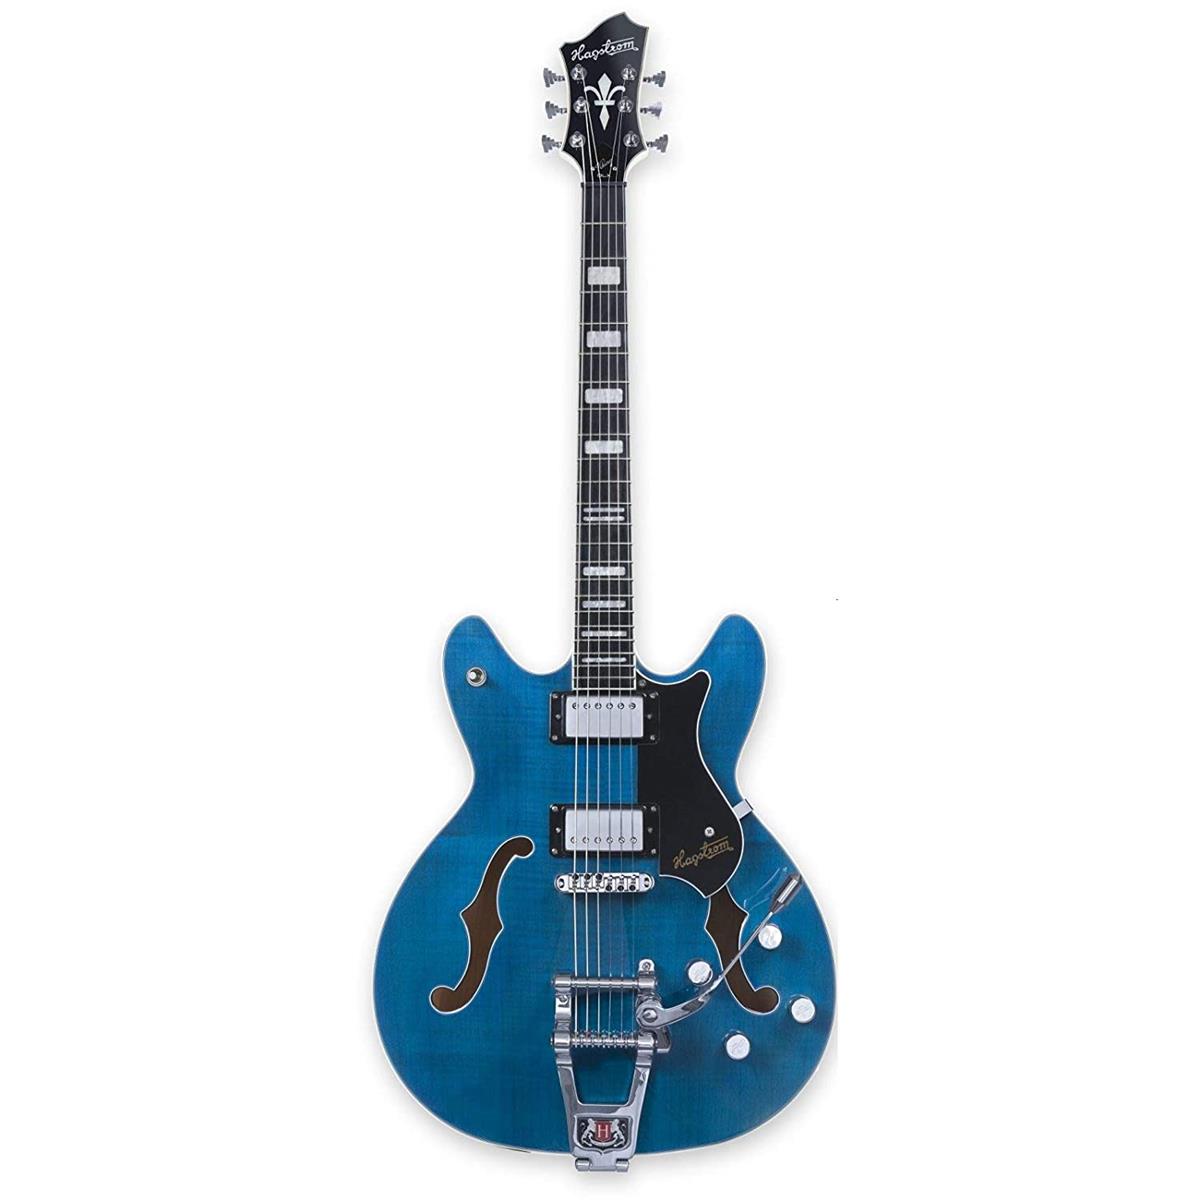 Hagstrom Tremar Viking Deluxe Electric Guitar, Cloudy Seas -  TREVIDLX-CLS